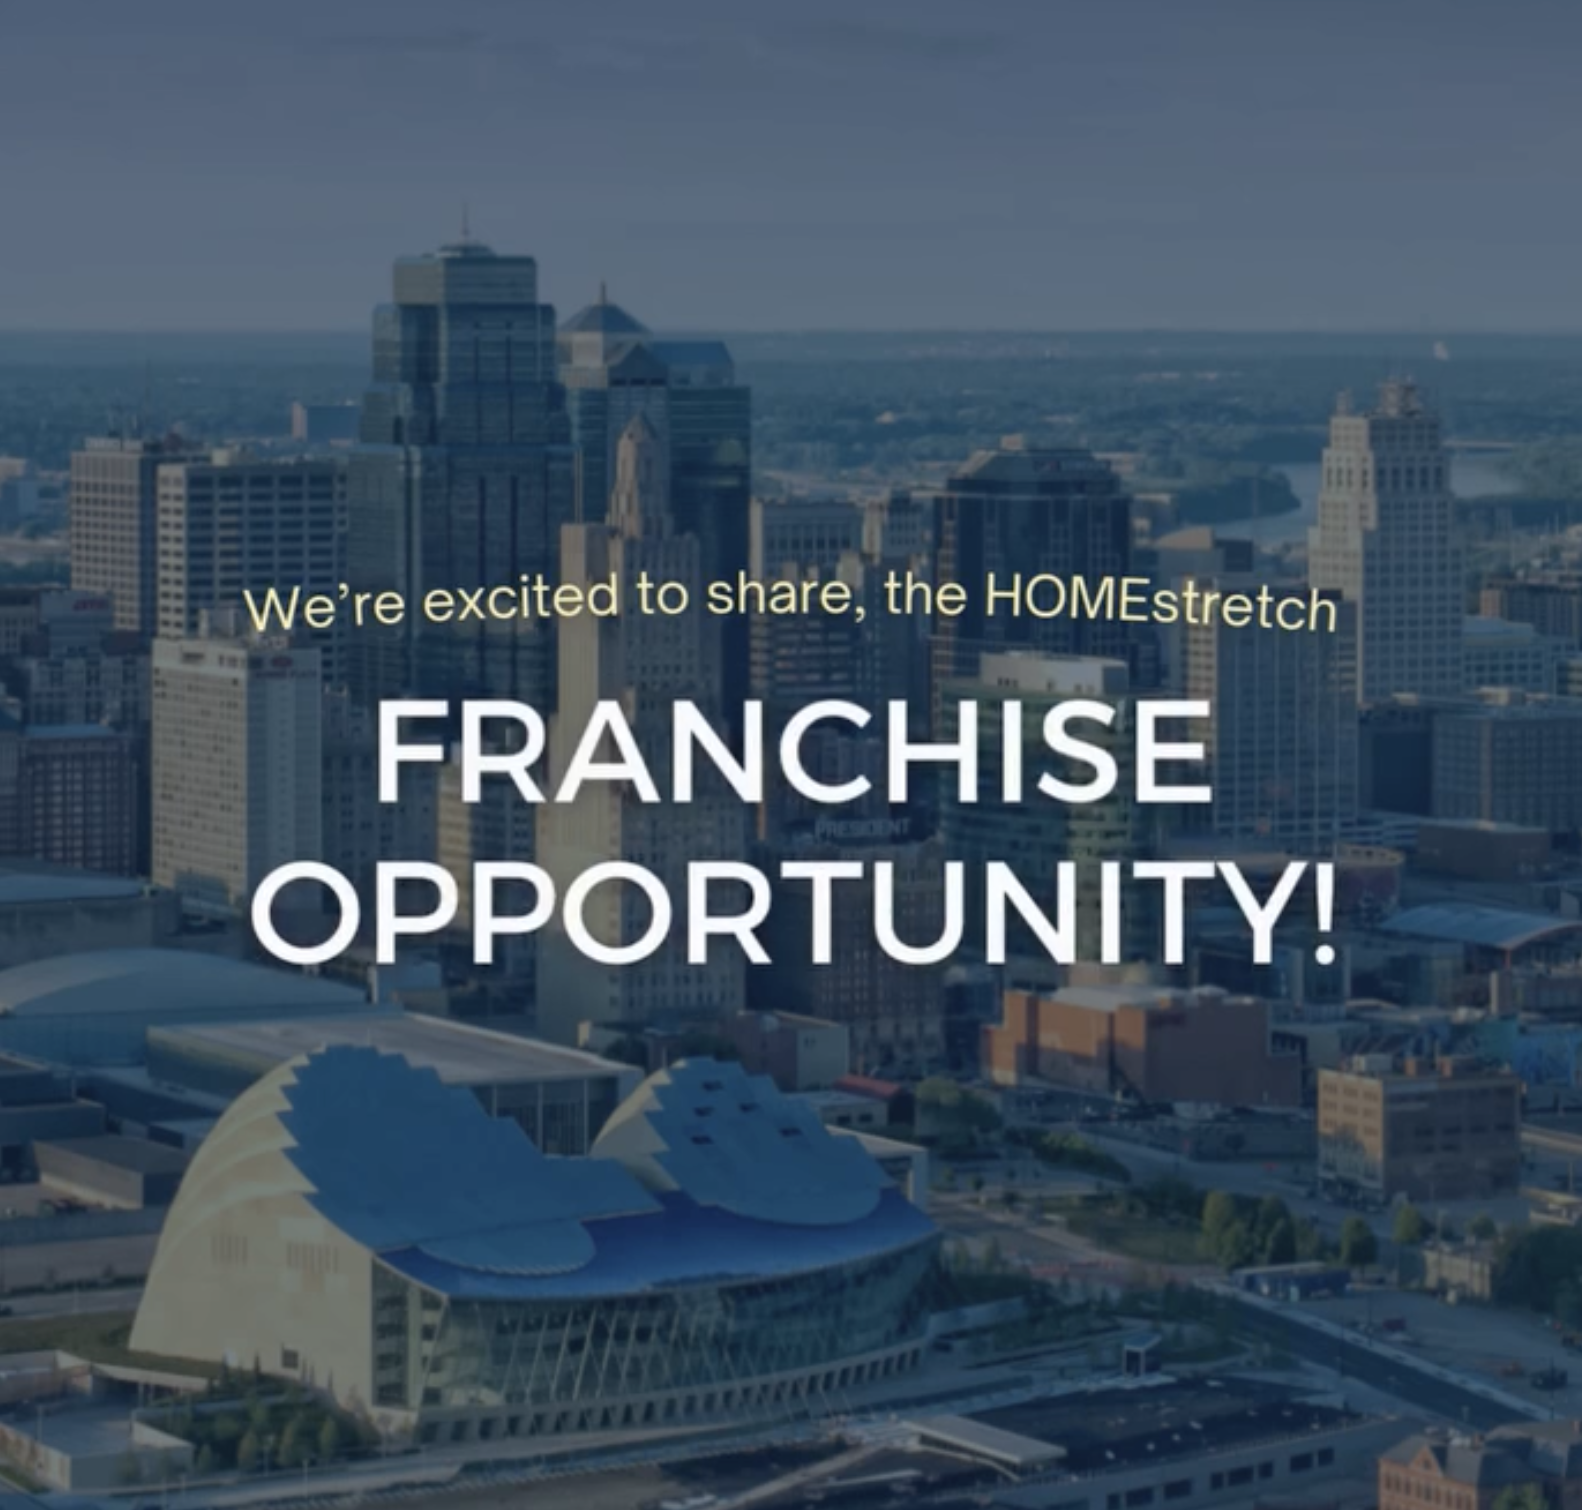 Franchise Opportunity Launched: November